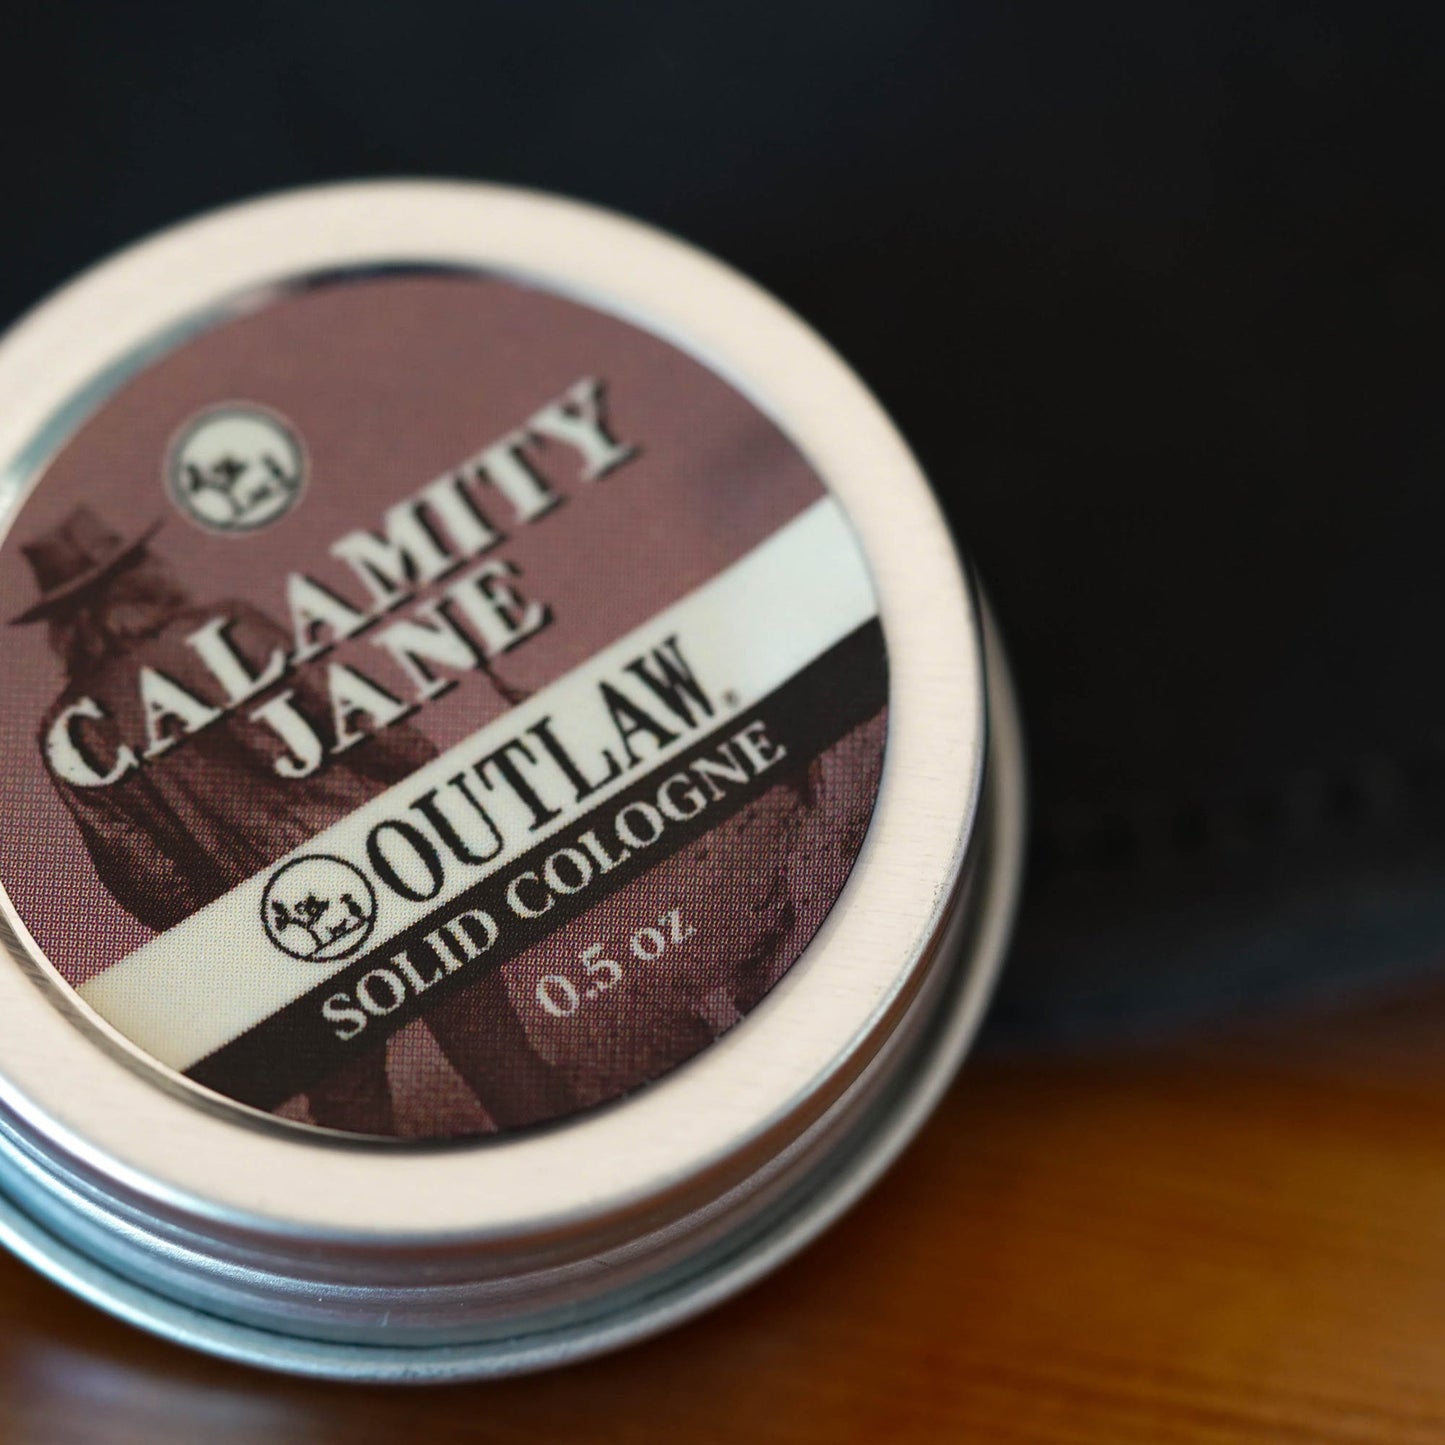 Calamity Jane Solid Cologne